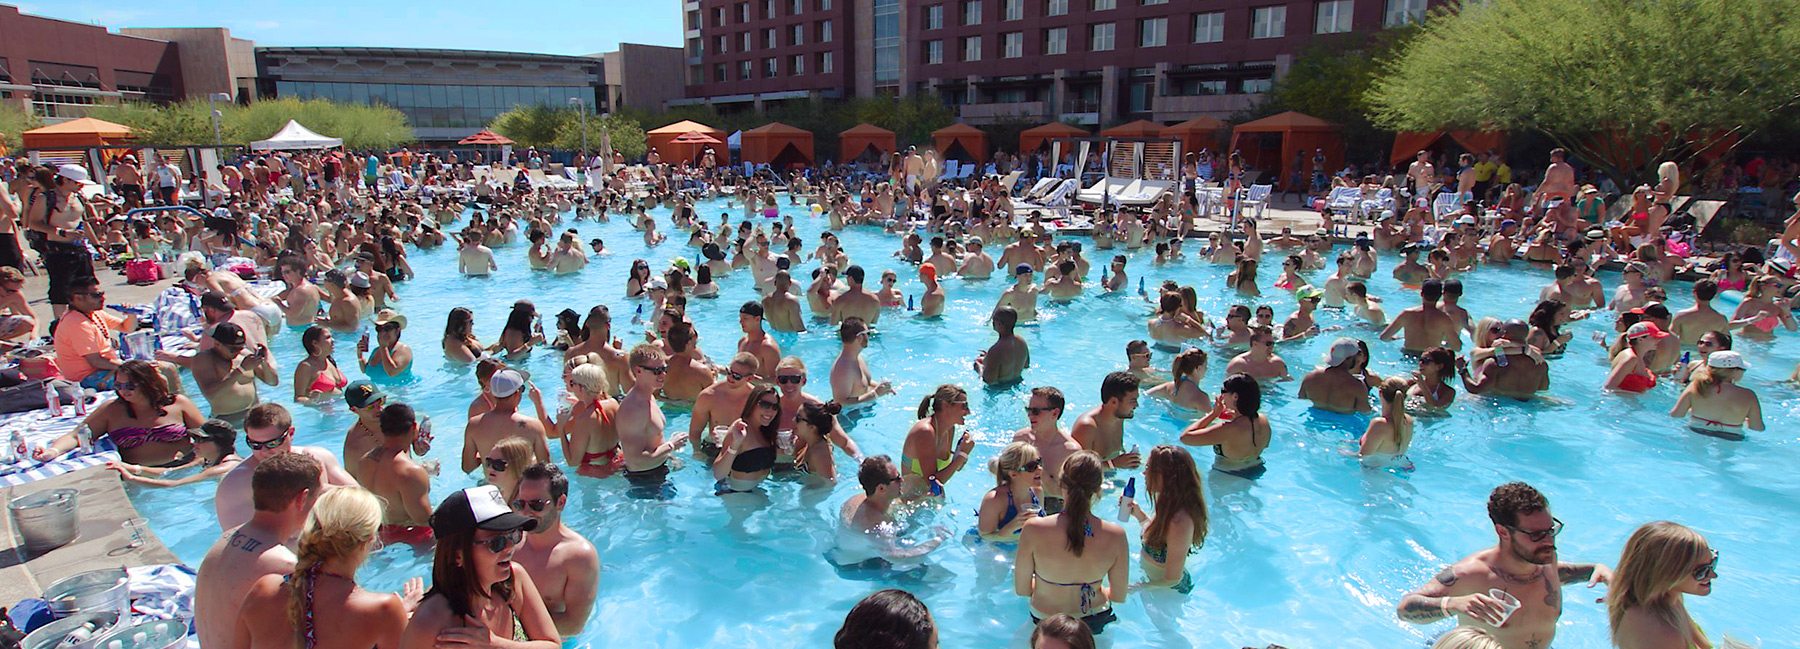 Chuckie brings new style to RELEASE Pool Party at Talking Stick